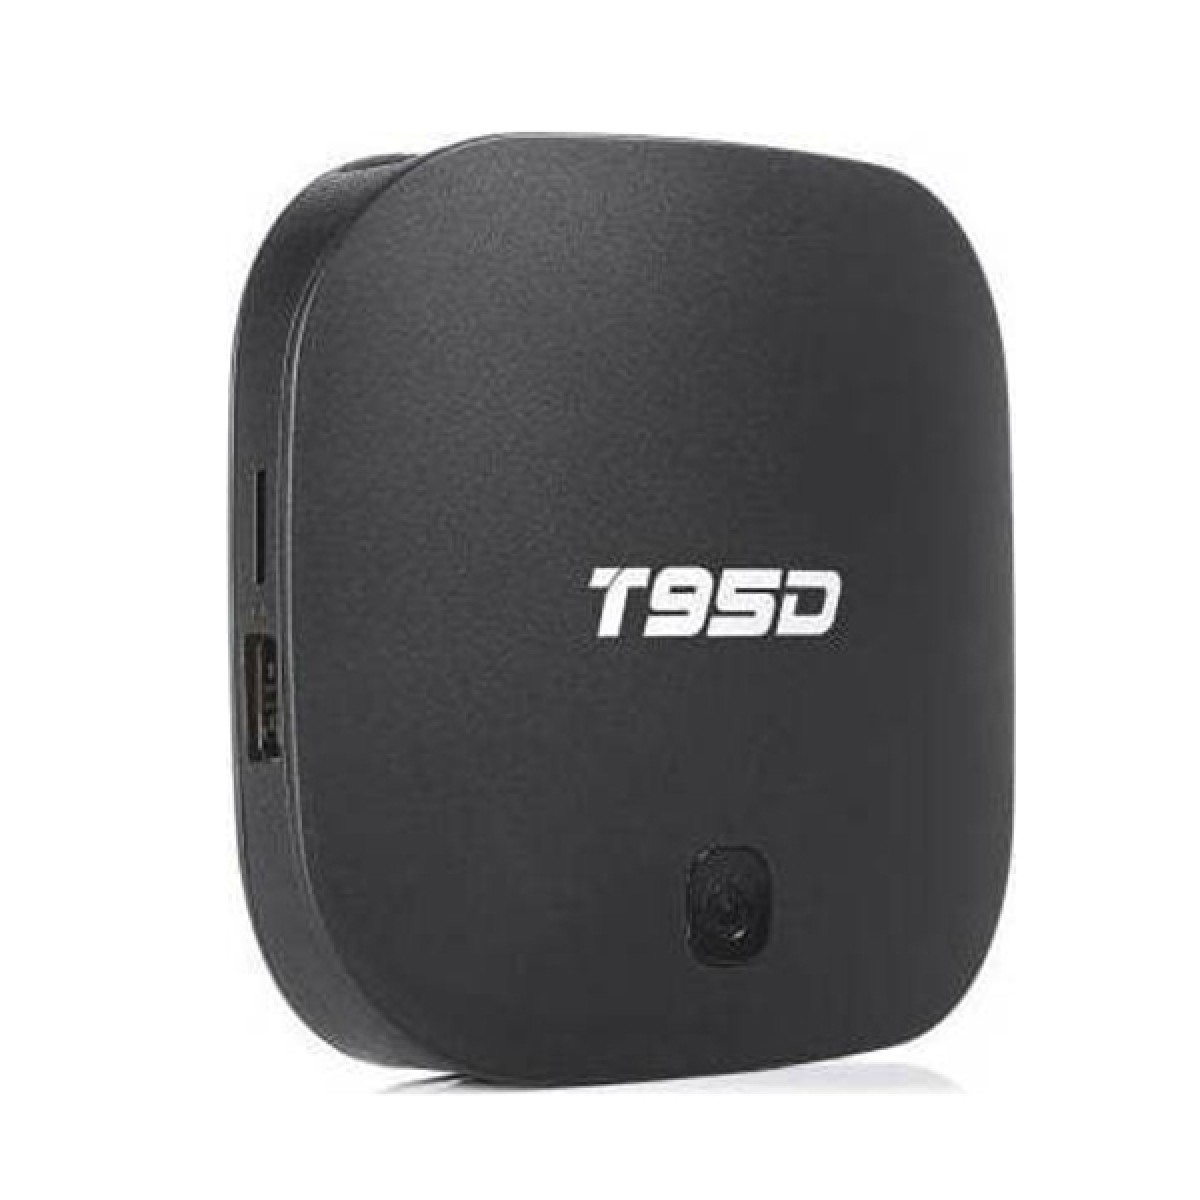 SUNVELL T95D Android 6.0 TV Box 1GB DDR3